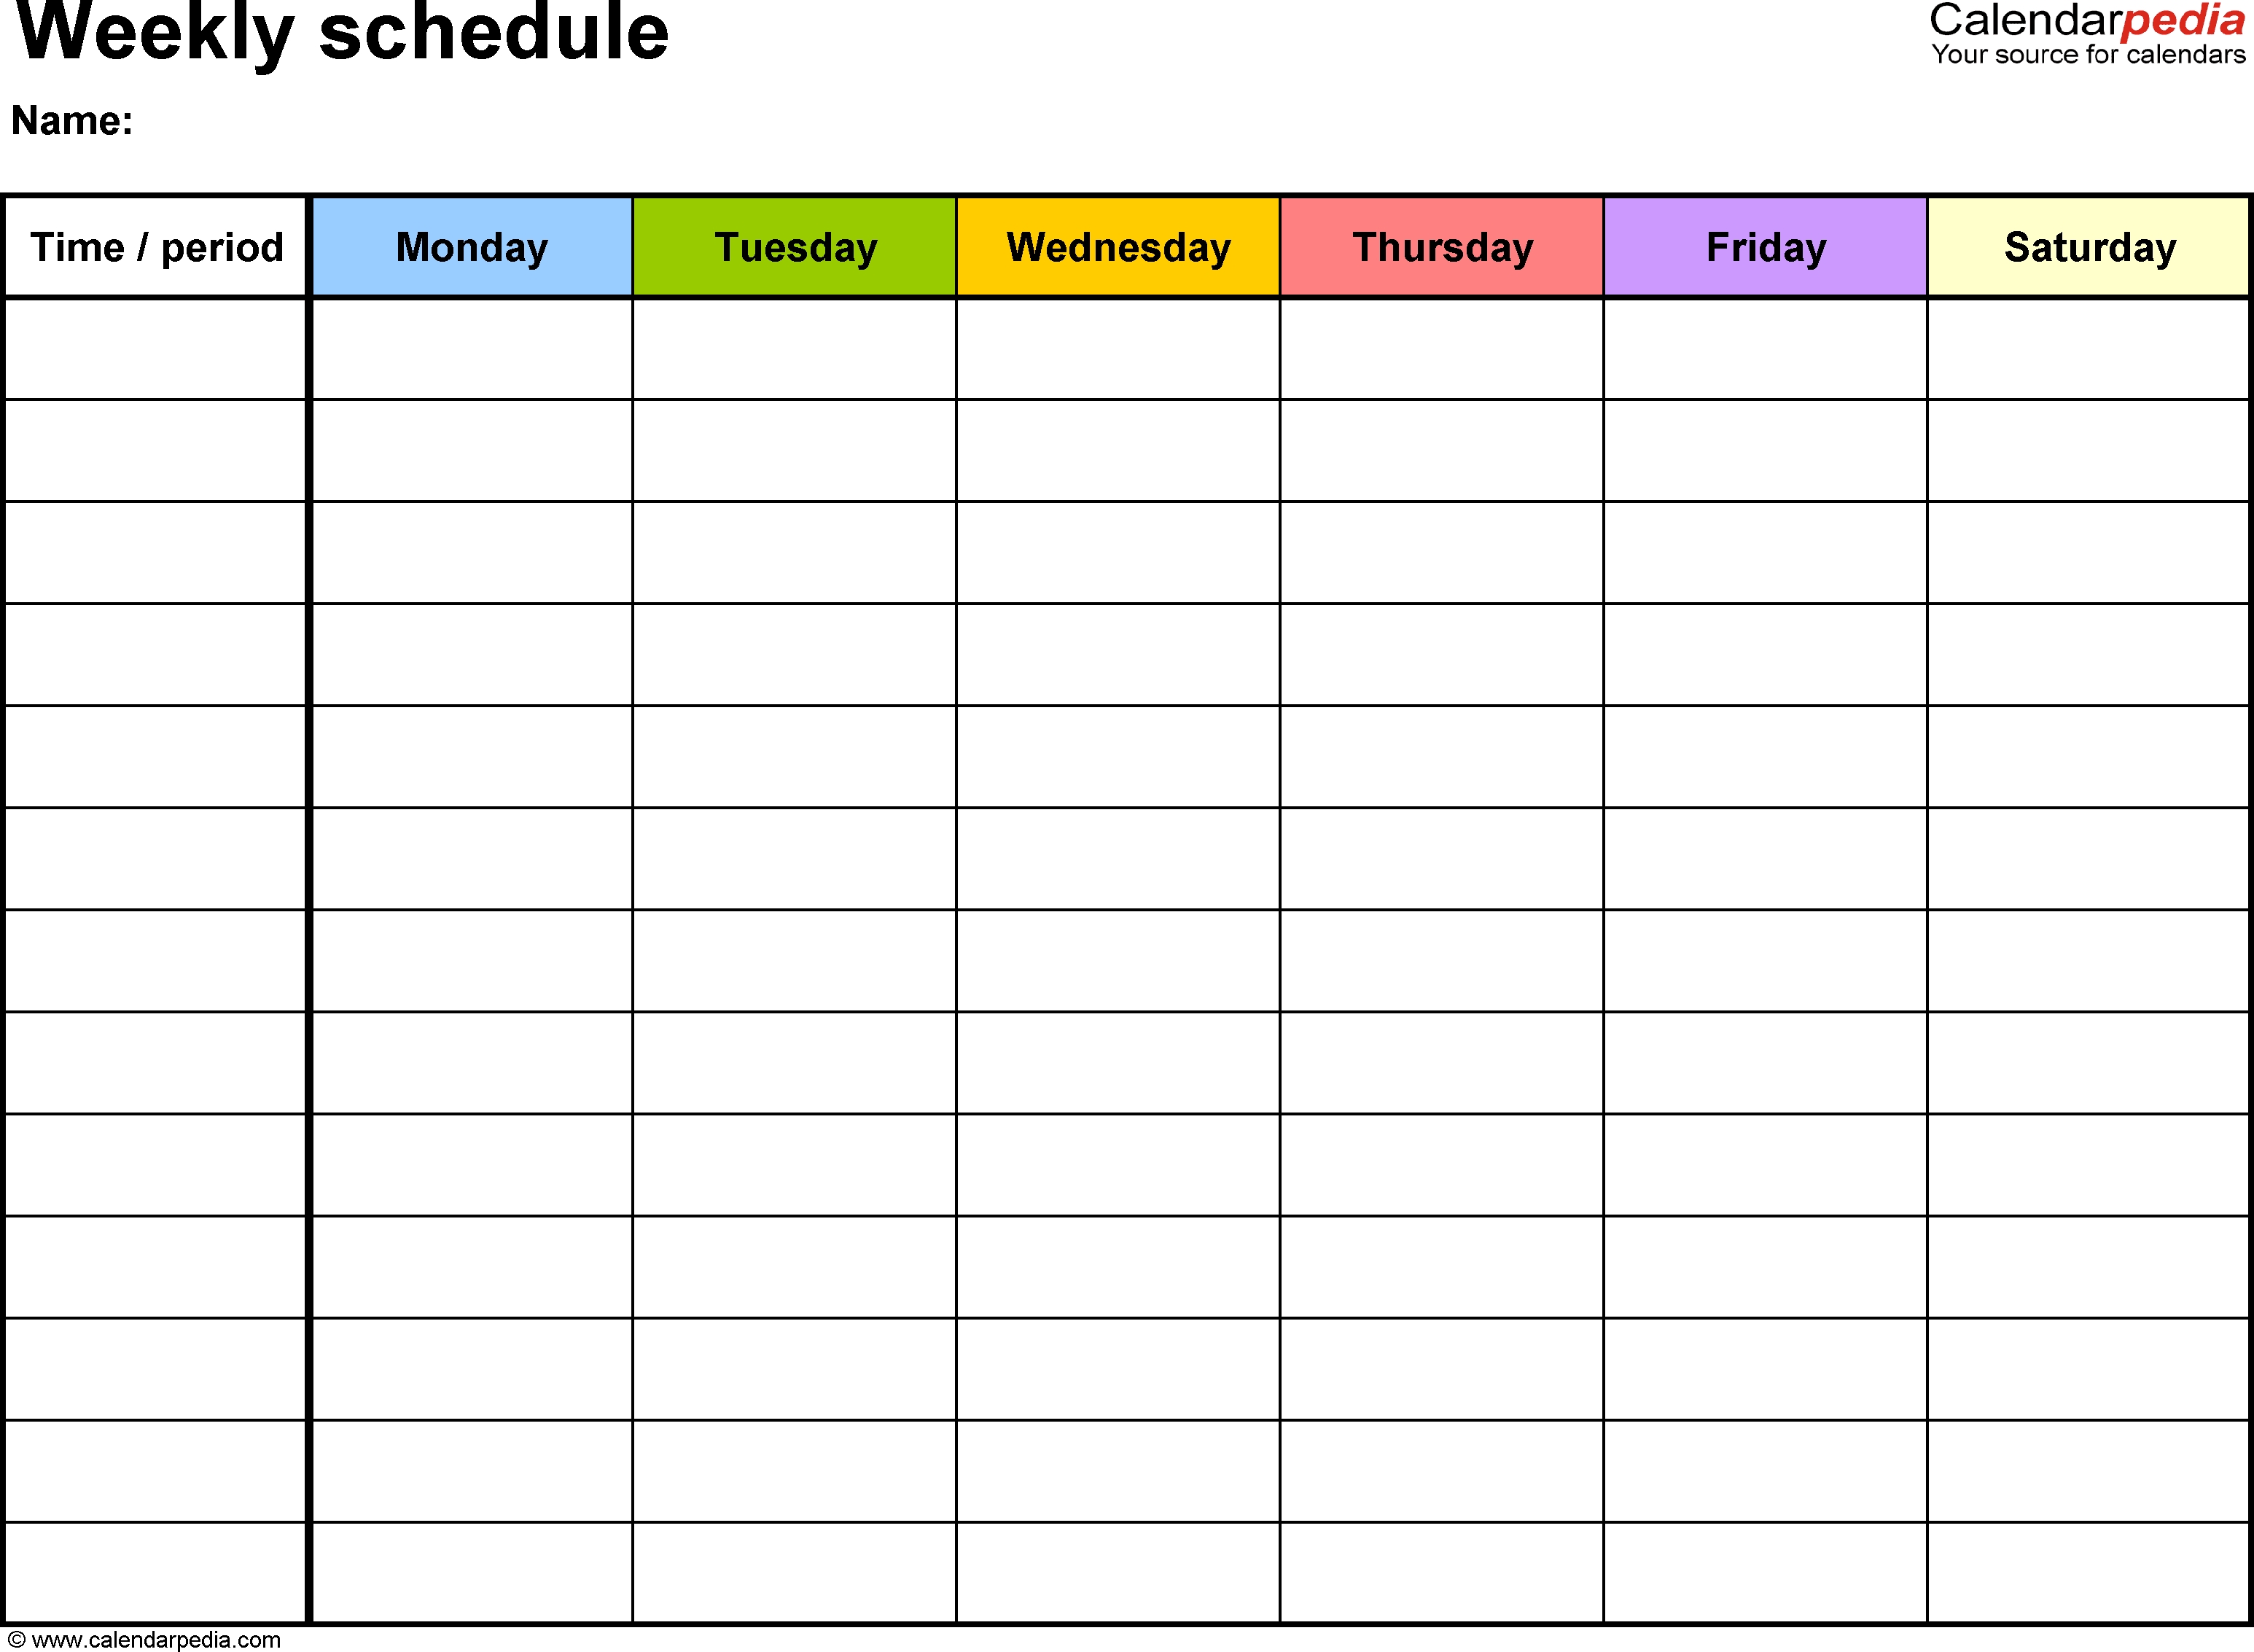 Free Weekly Schedule Templates For Word - 18 Templates Printable Monday Through Friday Planner